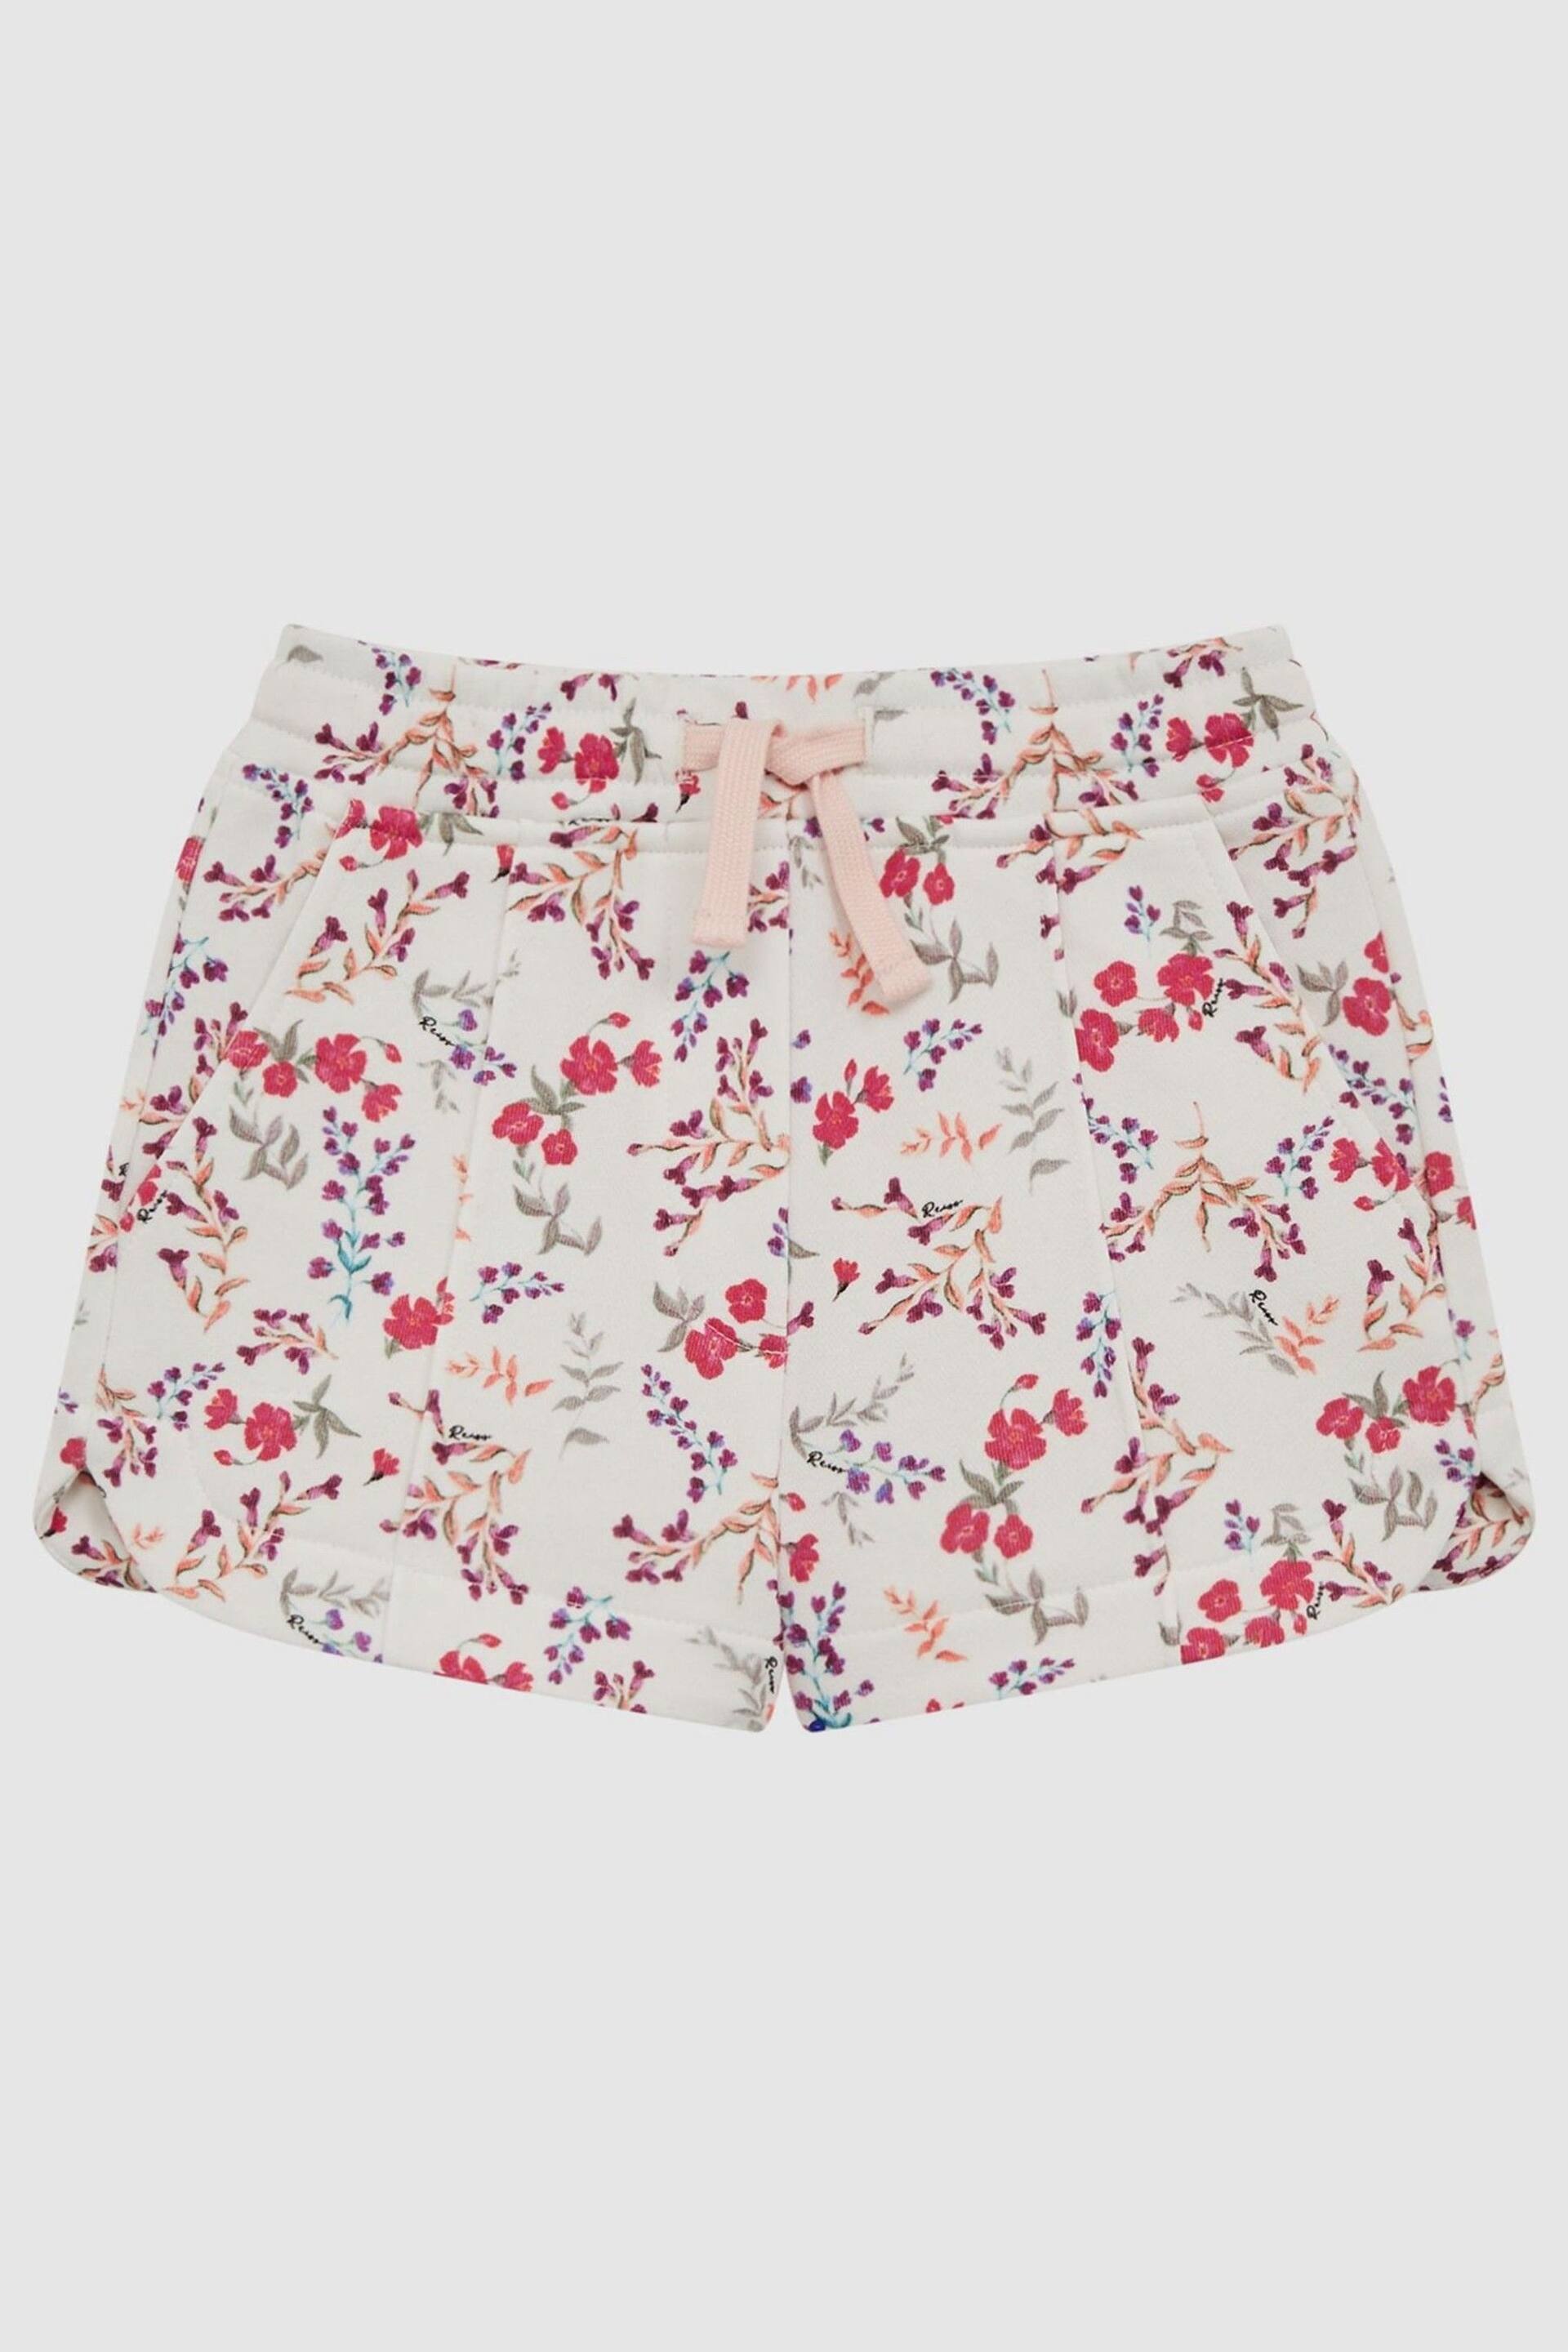 Reiss Pink Print Harper Senior Relaxed Floral Printed Shorts - Image 2 of 6